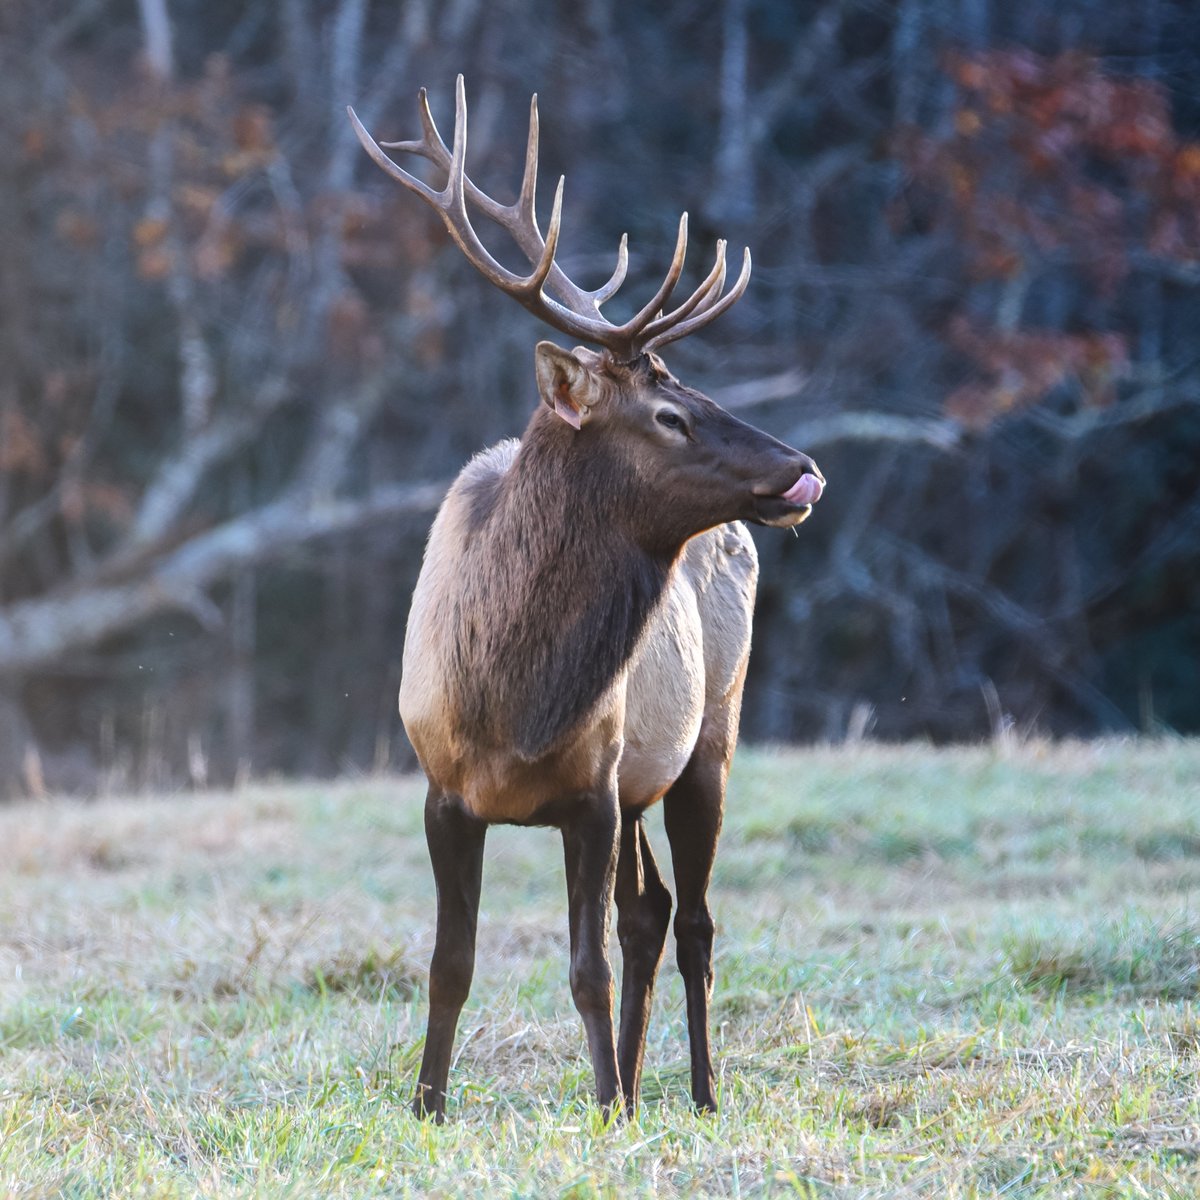 This Elk is enjoying Cataloochee Valley so much he's licking his lips in anticipation. #wildlifephotography #WildlifeConservation #WildlifeWednesday #NaturePhotography #cataloochee #cataloocheenc #cataloocheevalley #NationalPark #elk